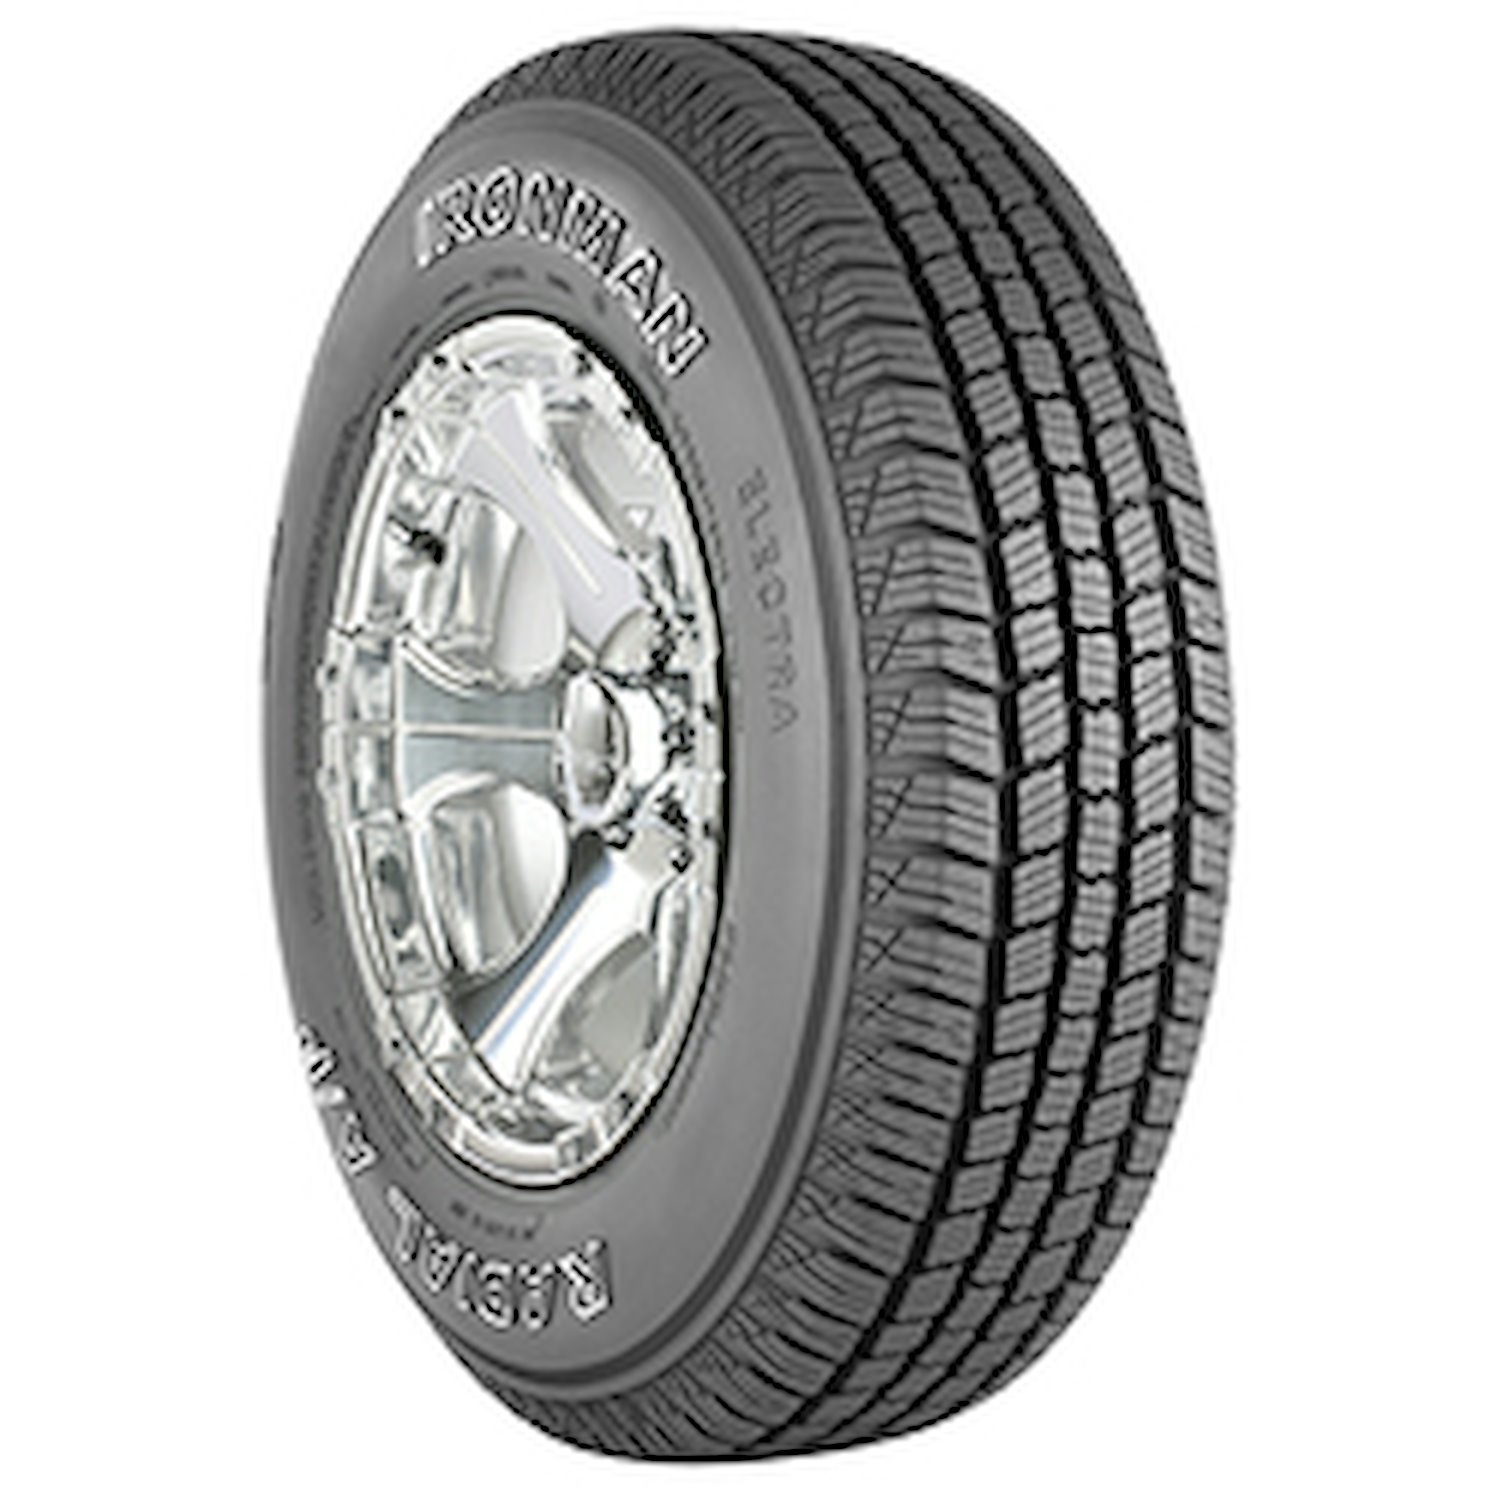 Radial A/P Tire, 245/75R16 111T